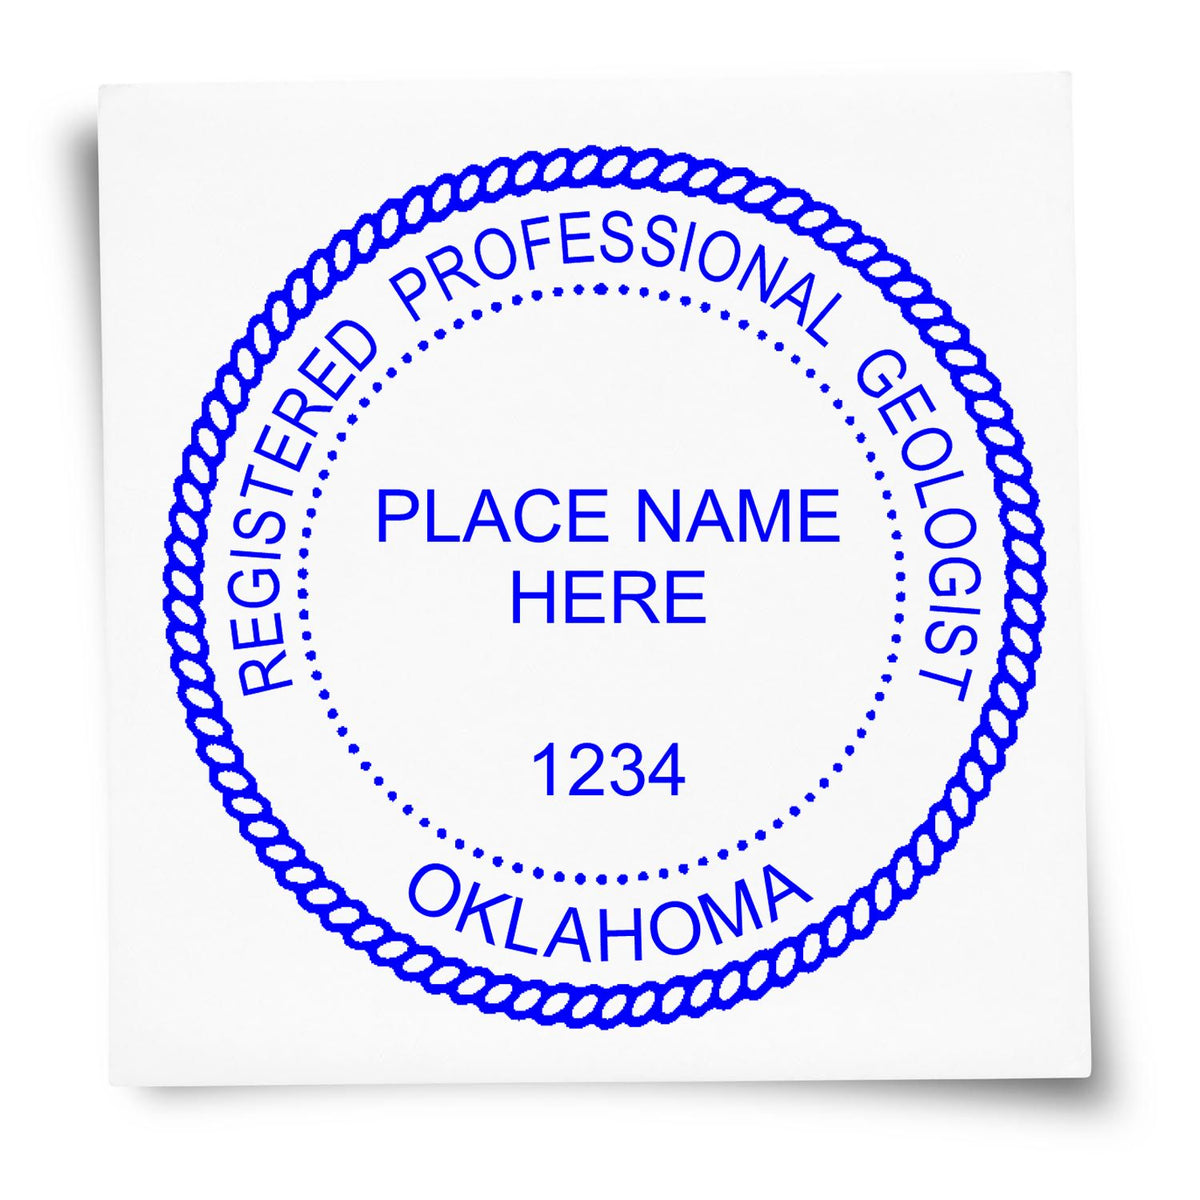 The Slim Pre-Inked Oklahoma Professional Geologist Seal Stamp stamp impression comes to life with a crisp, detailed image stamped on paper - showcasing true professional quality.